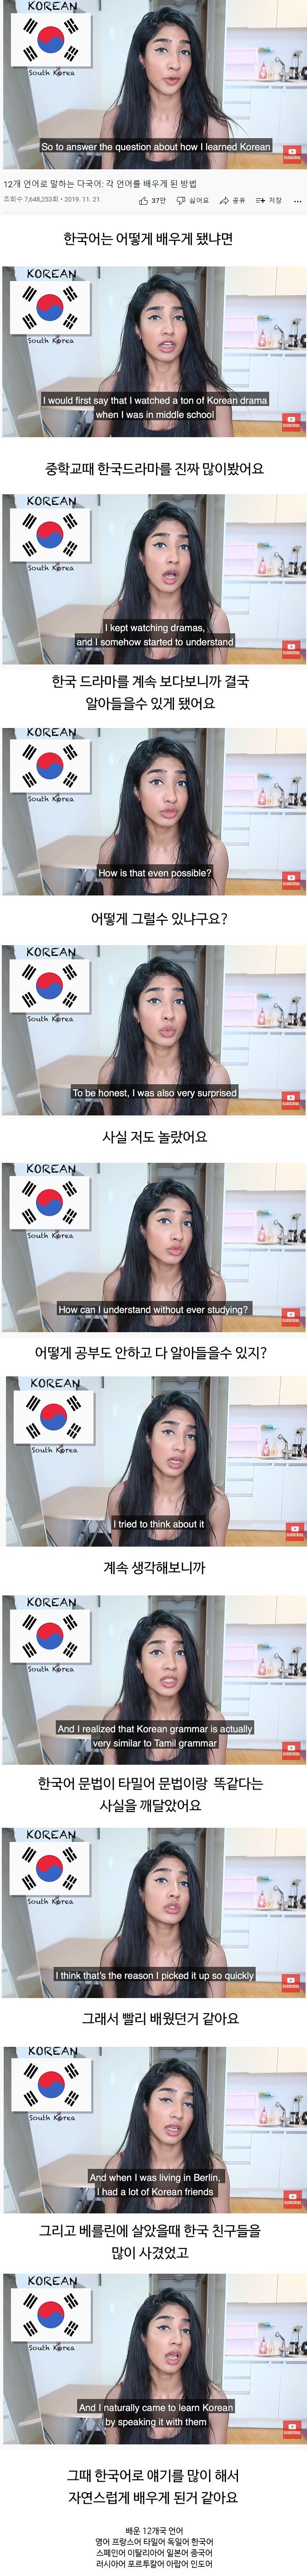 Korean spoken by an Indian woman who learned 12 languages.jpg